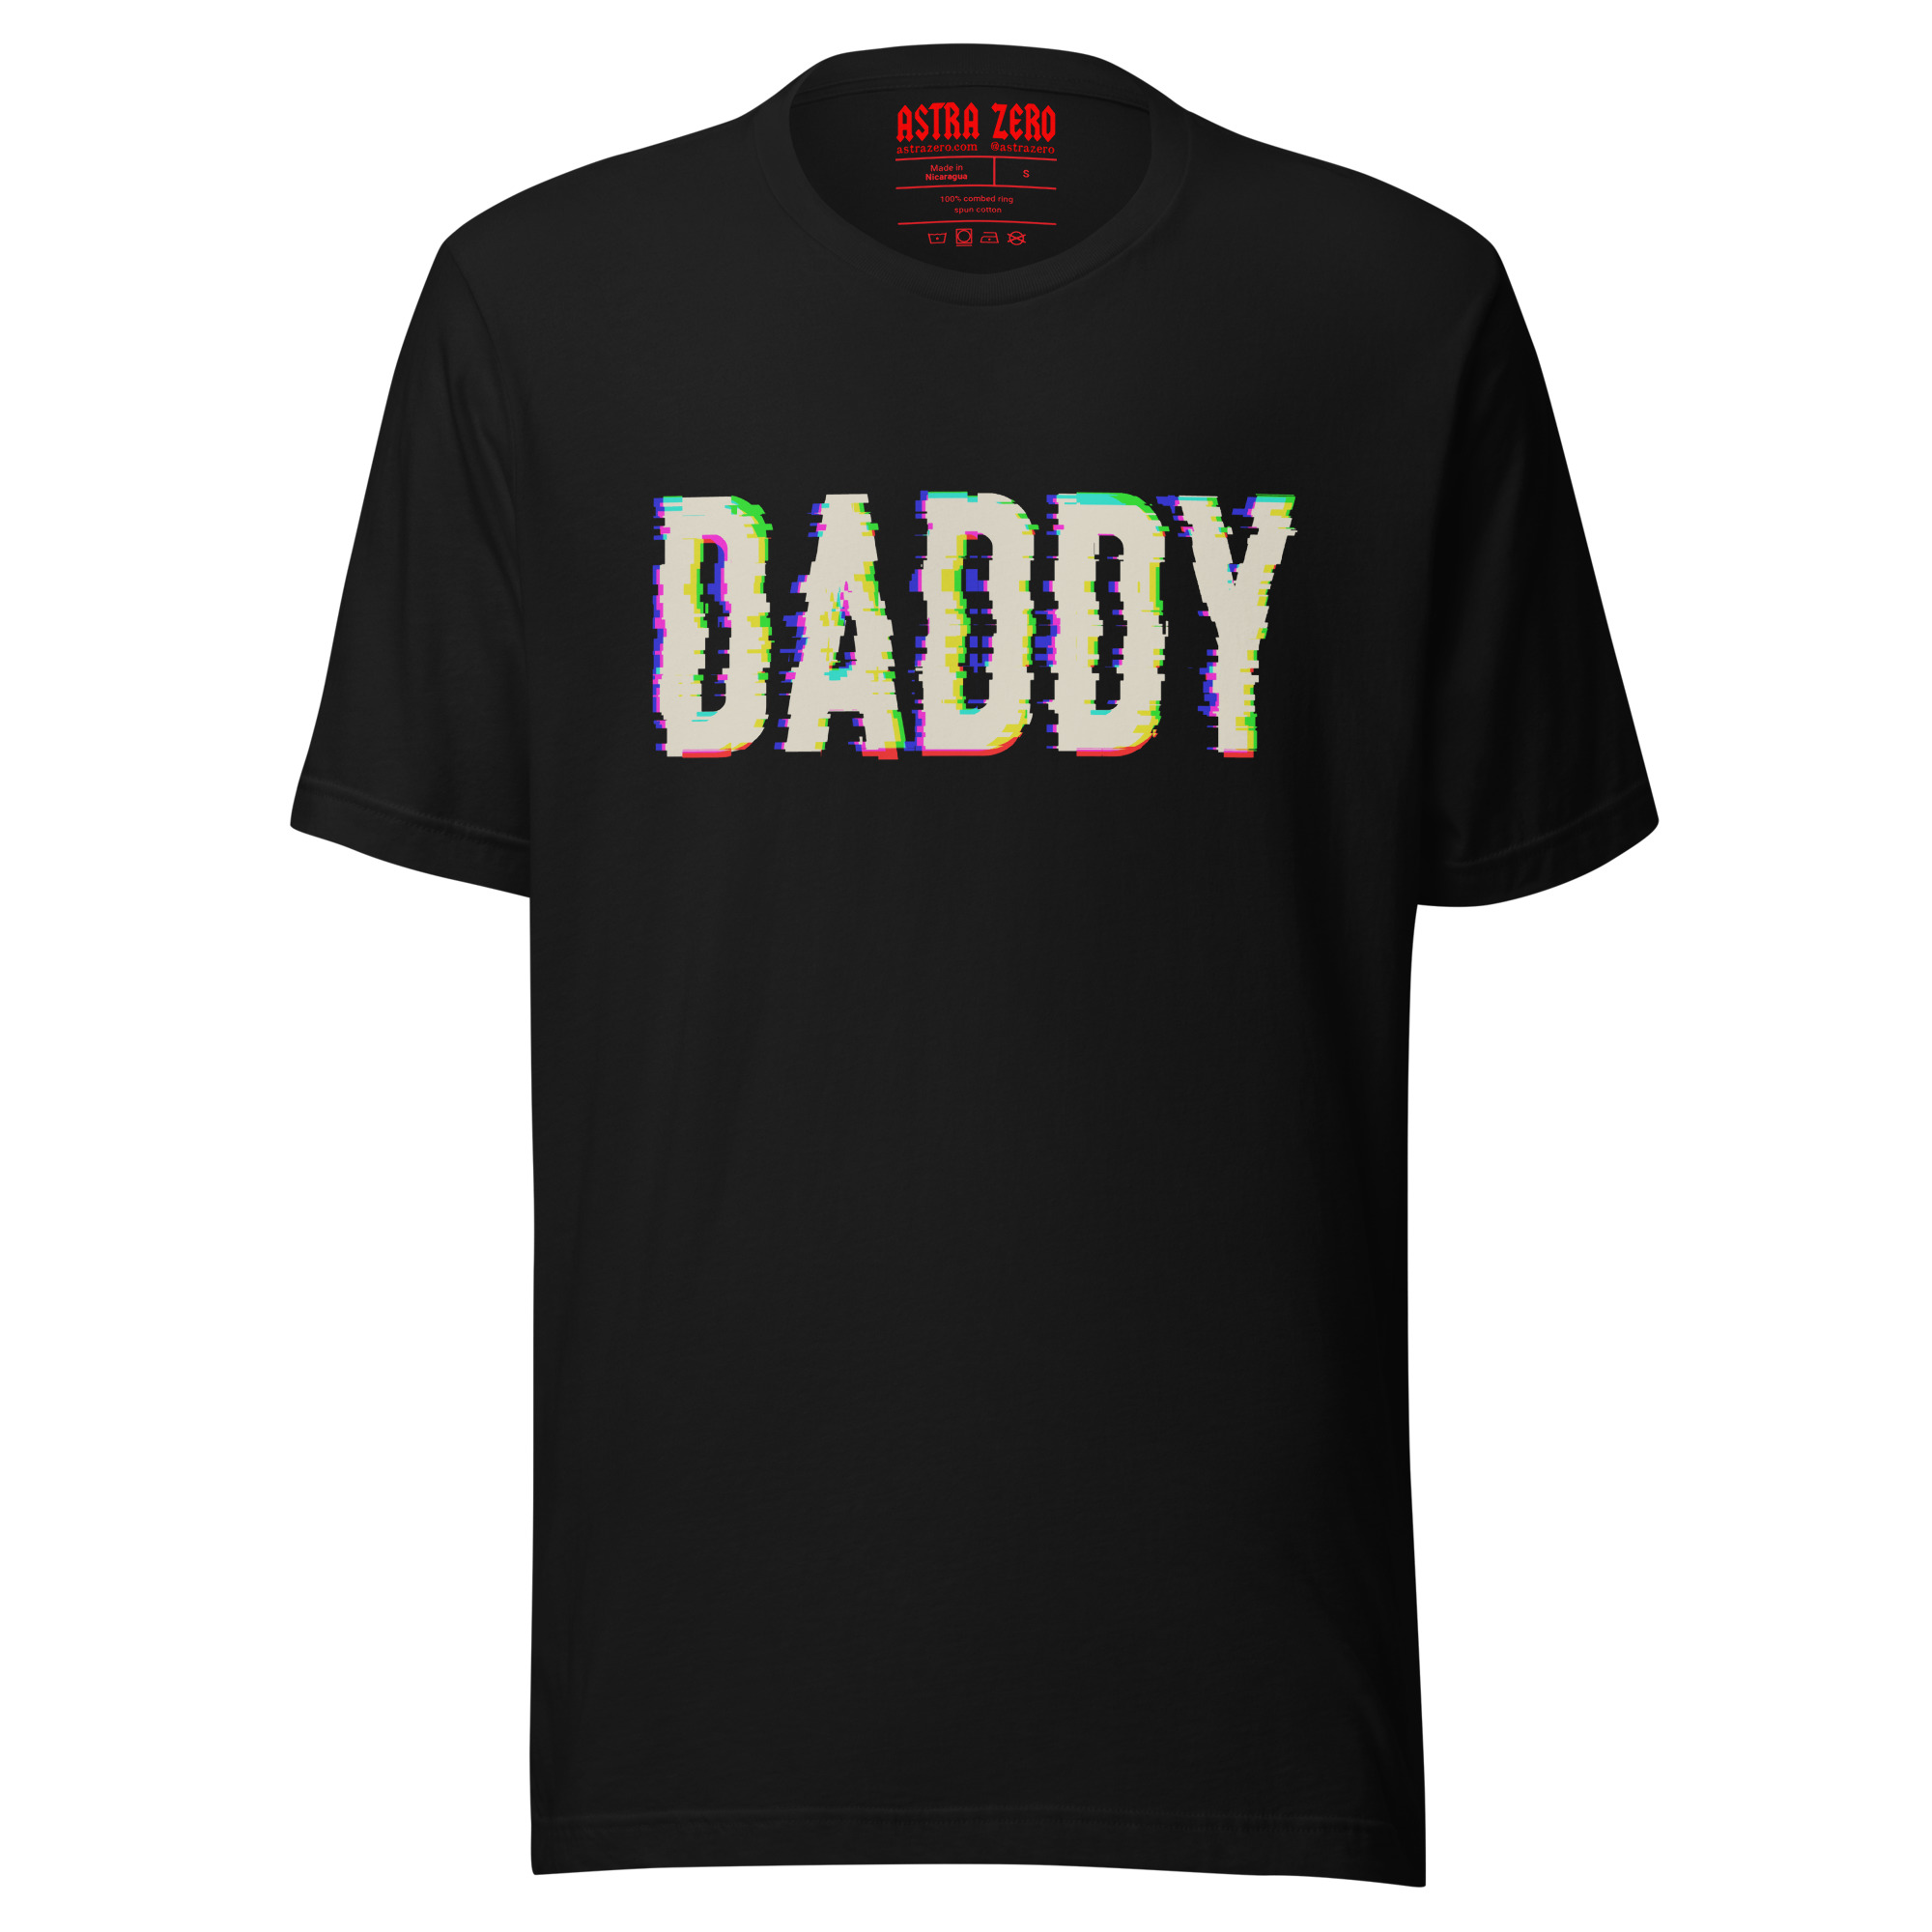 Featured image for “DADDY (glitch) - Unisex t-shirt”